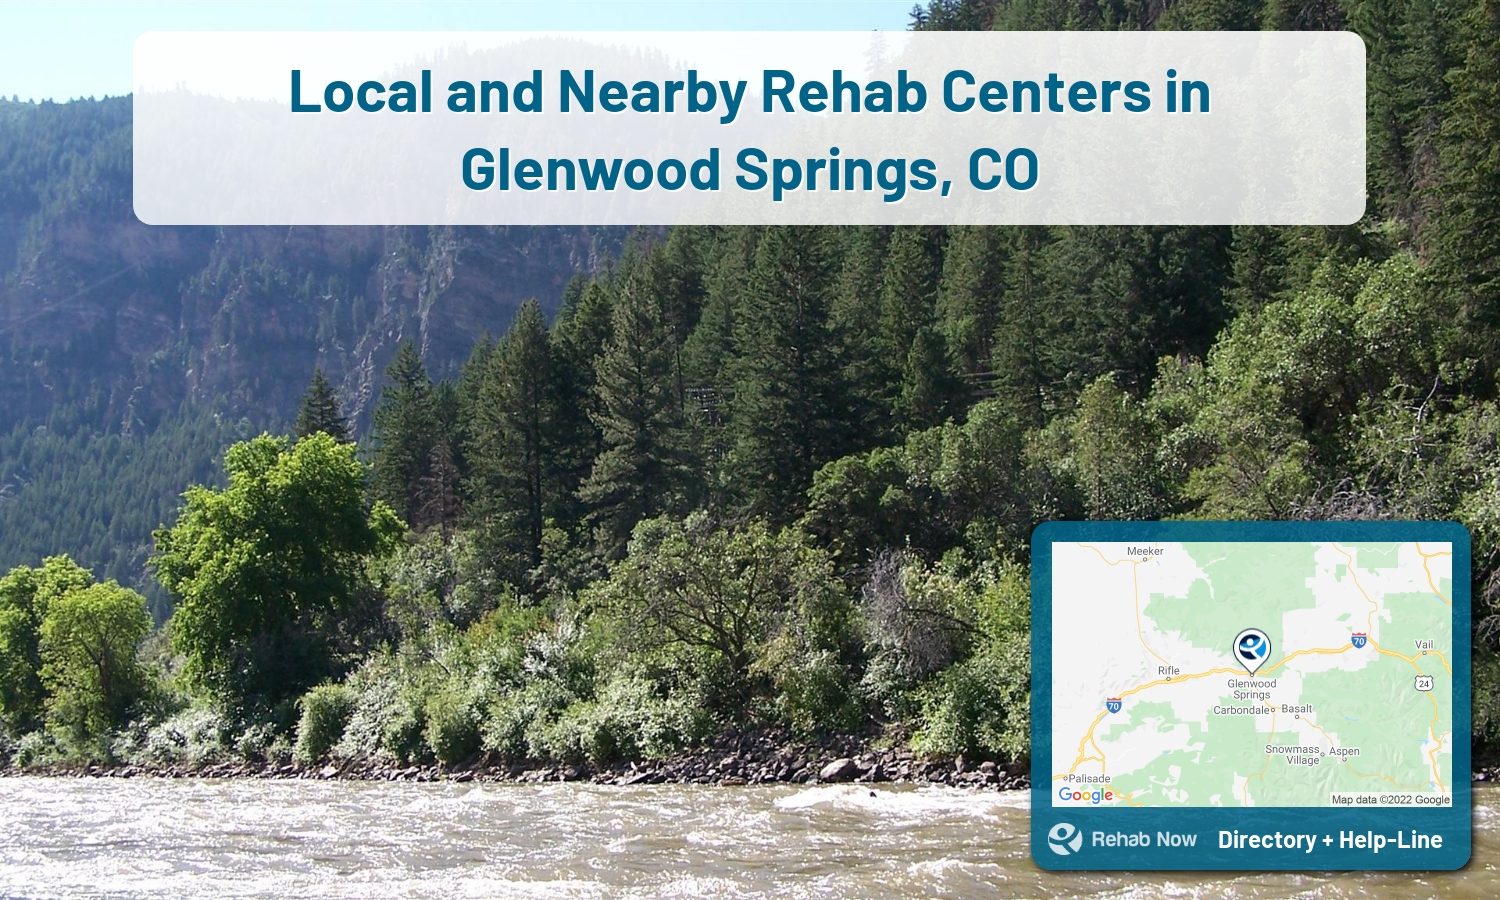 Ready to pick a rehab center in Glenwood Springs? Get off alcohol, opiates, and other drugs, by selecting top drug rehab centers in Colorado